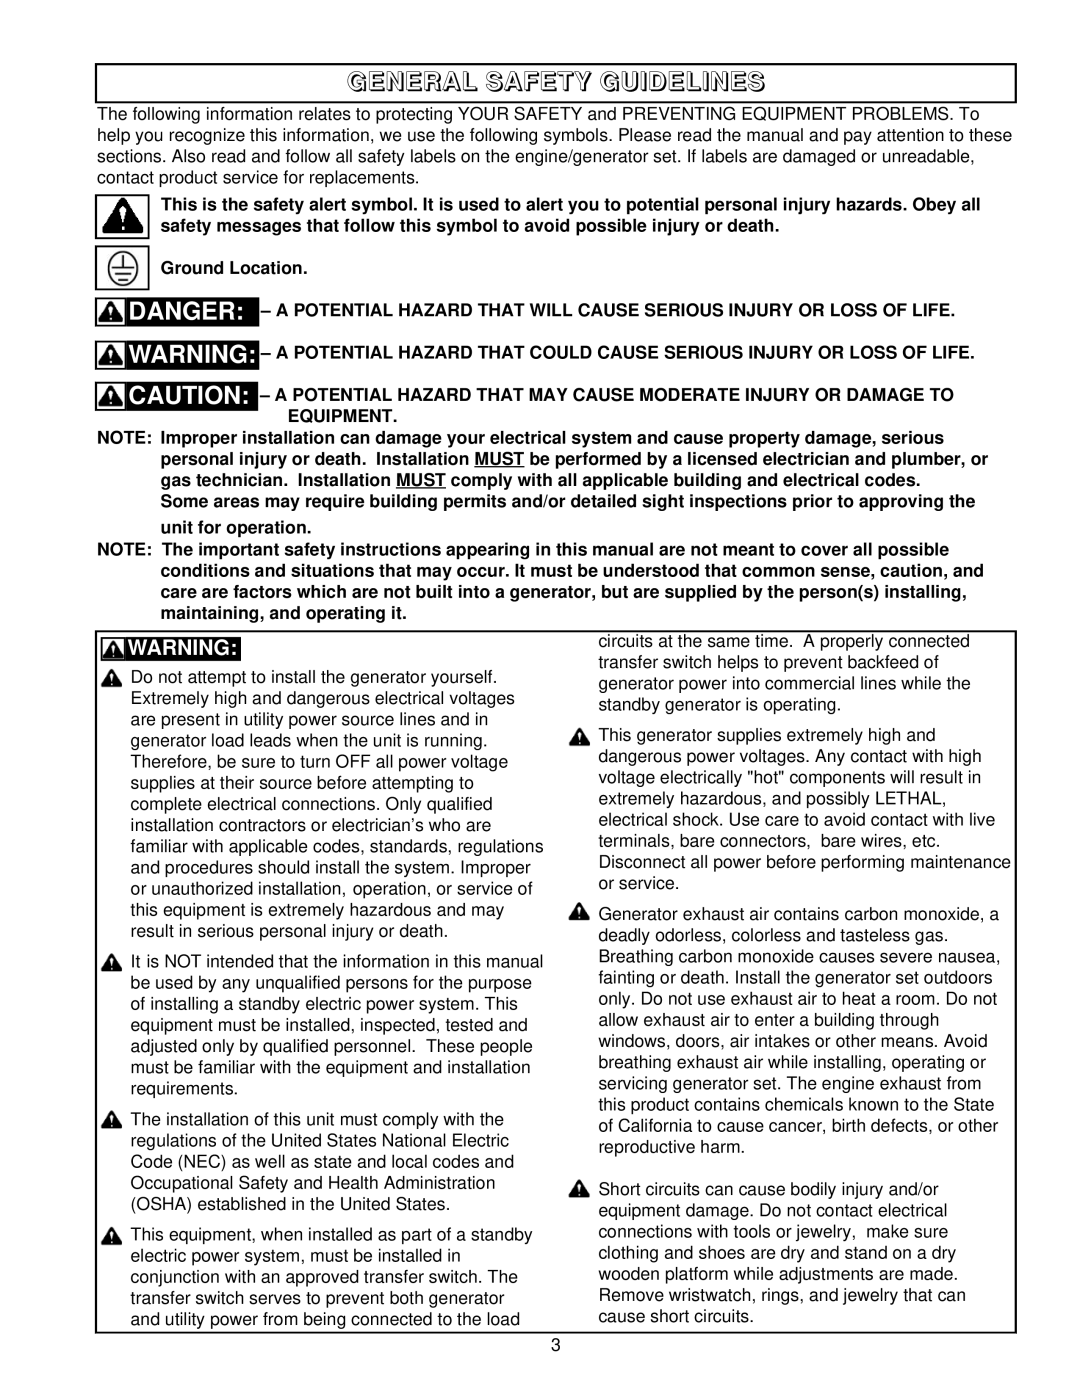 Coleman PM402511 owner manual General Safety Guidelines 